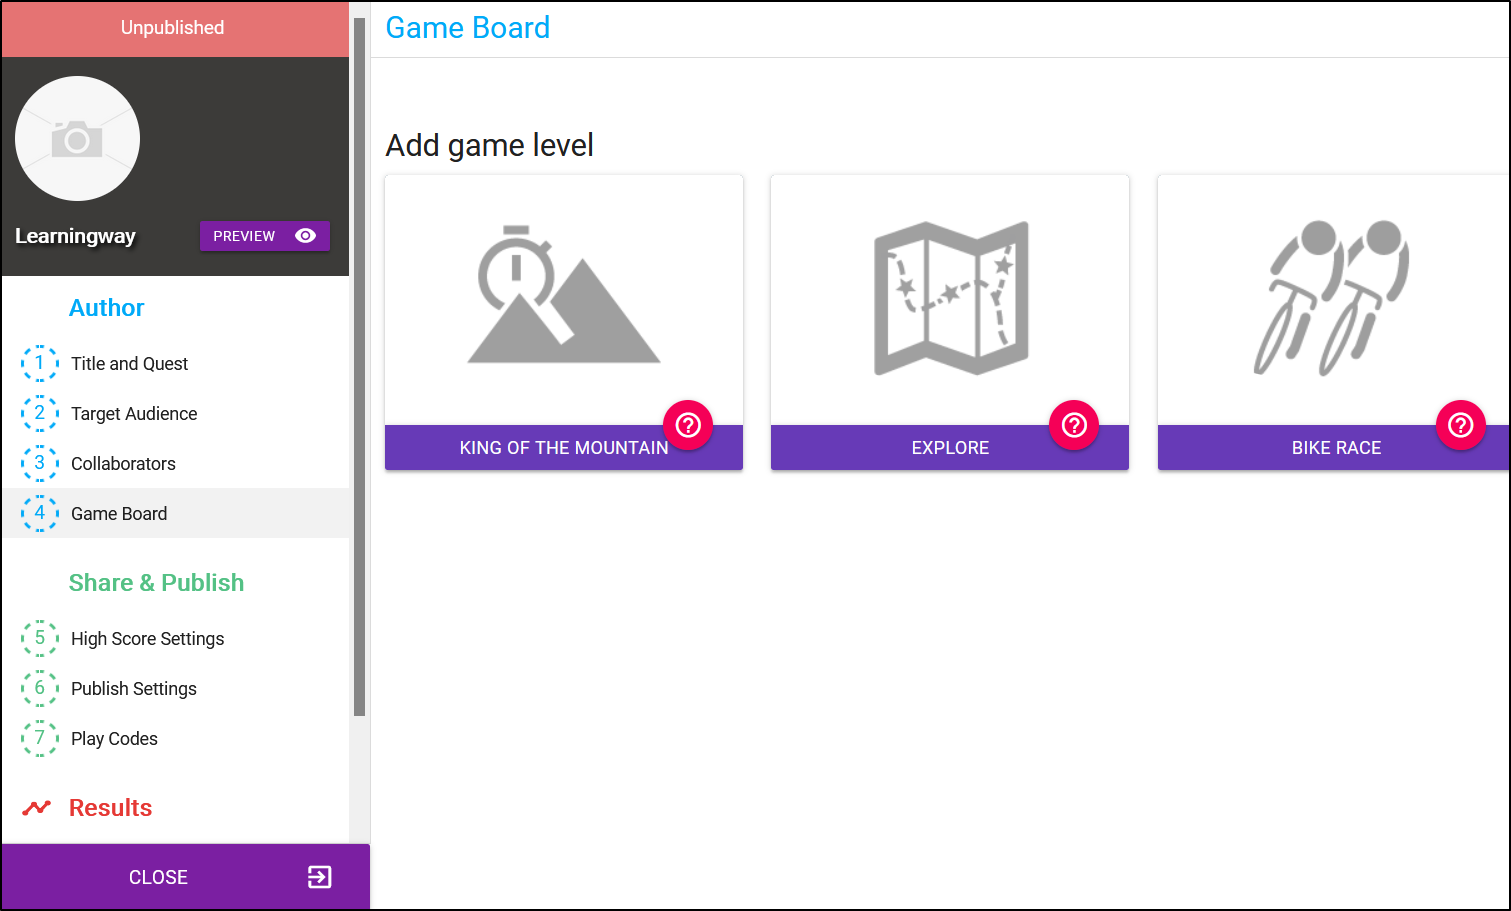 Image of adding a new level to the game board